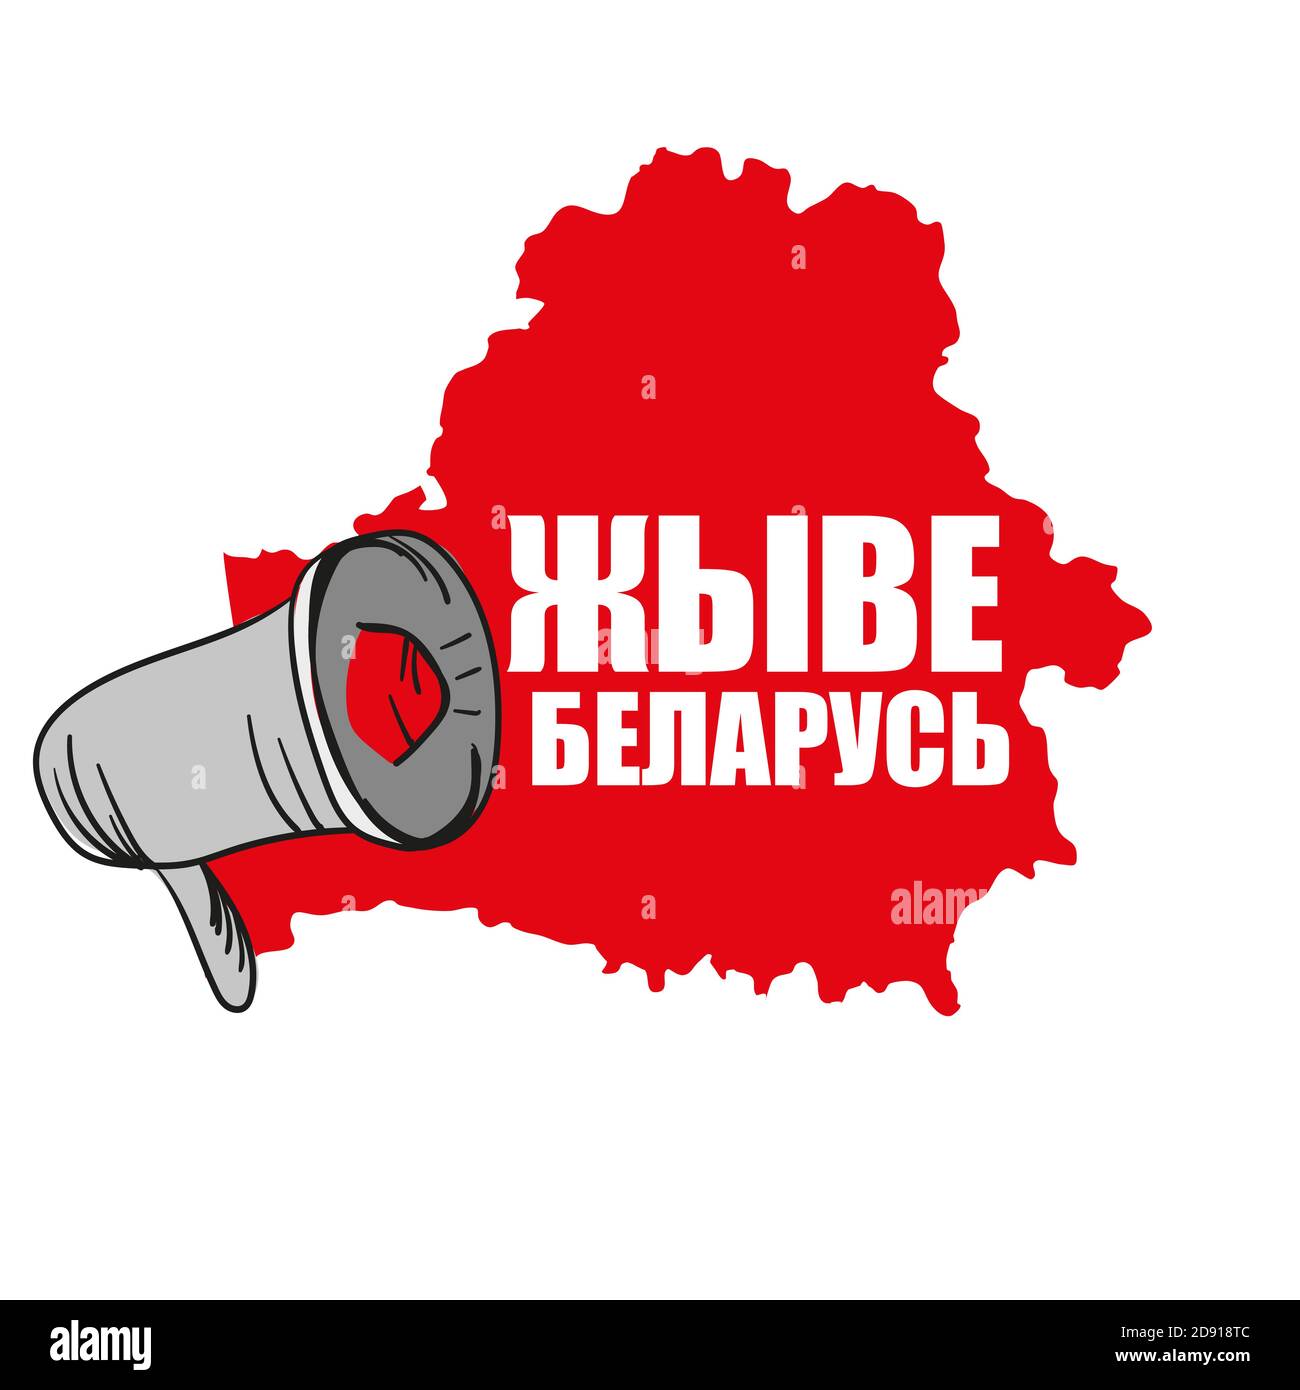 Text in Belarusian - Long live Belarus. Protests in Belarus after the 2020 presidential elections. Raised speaker shout. Vector illustration Stock Vector